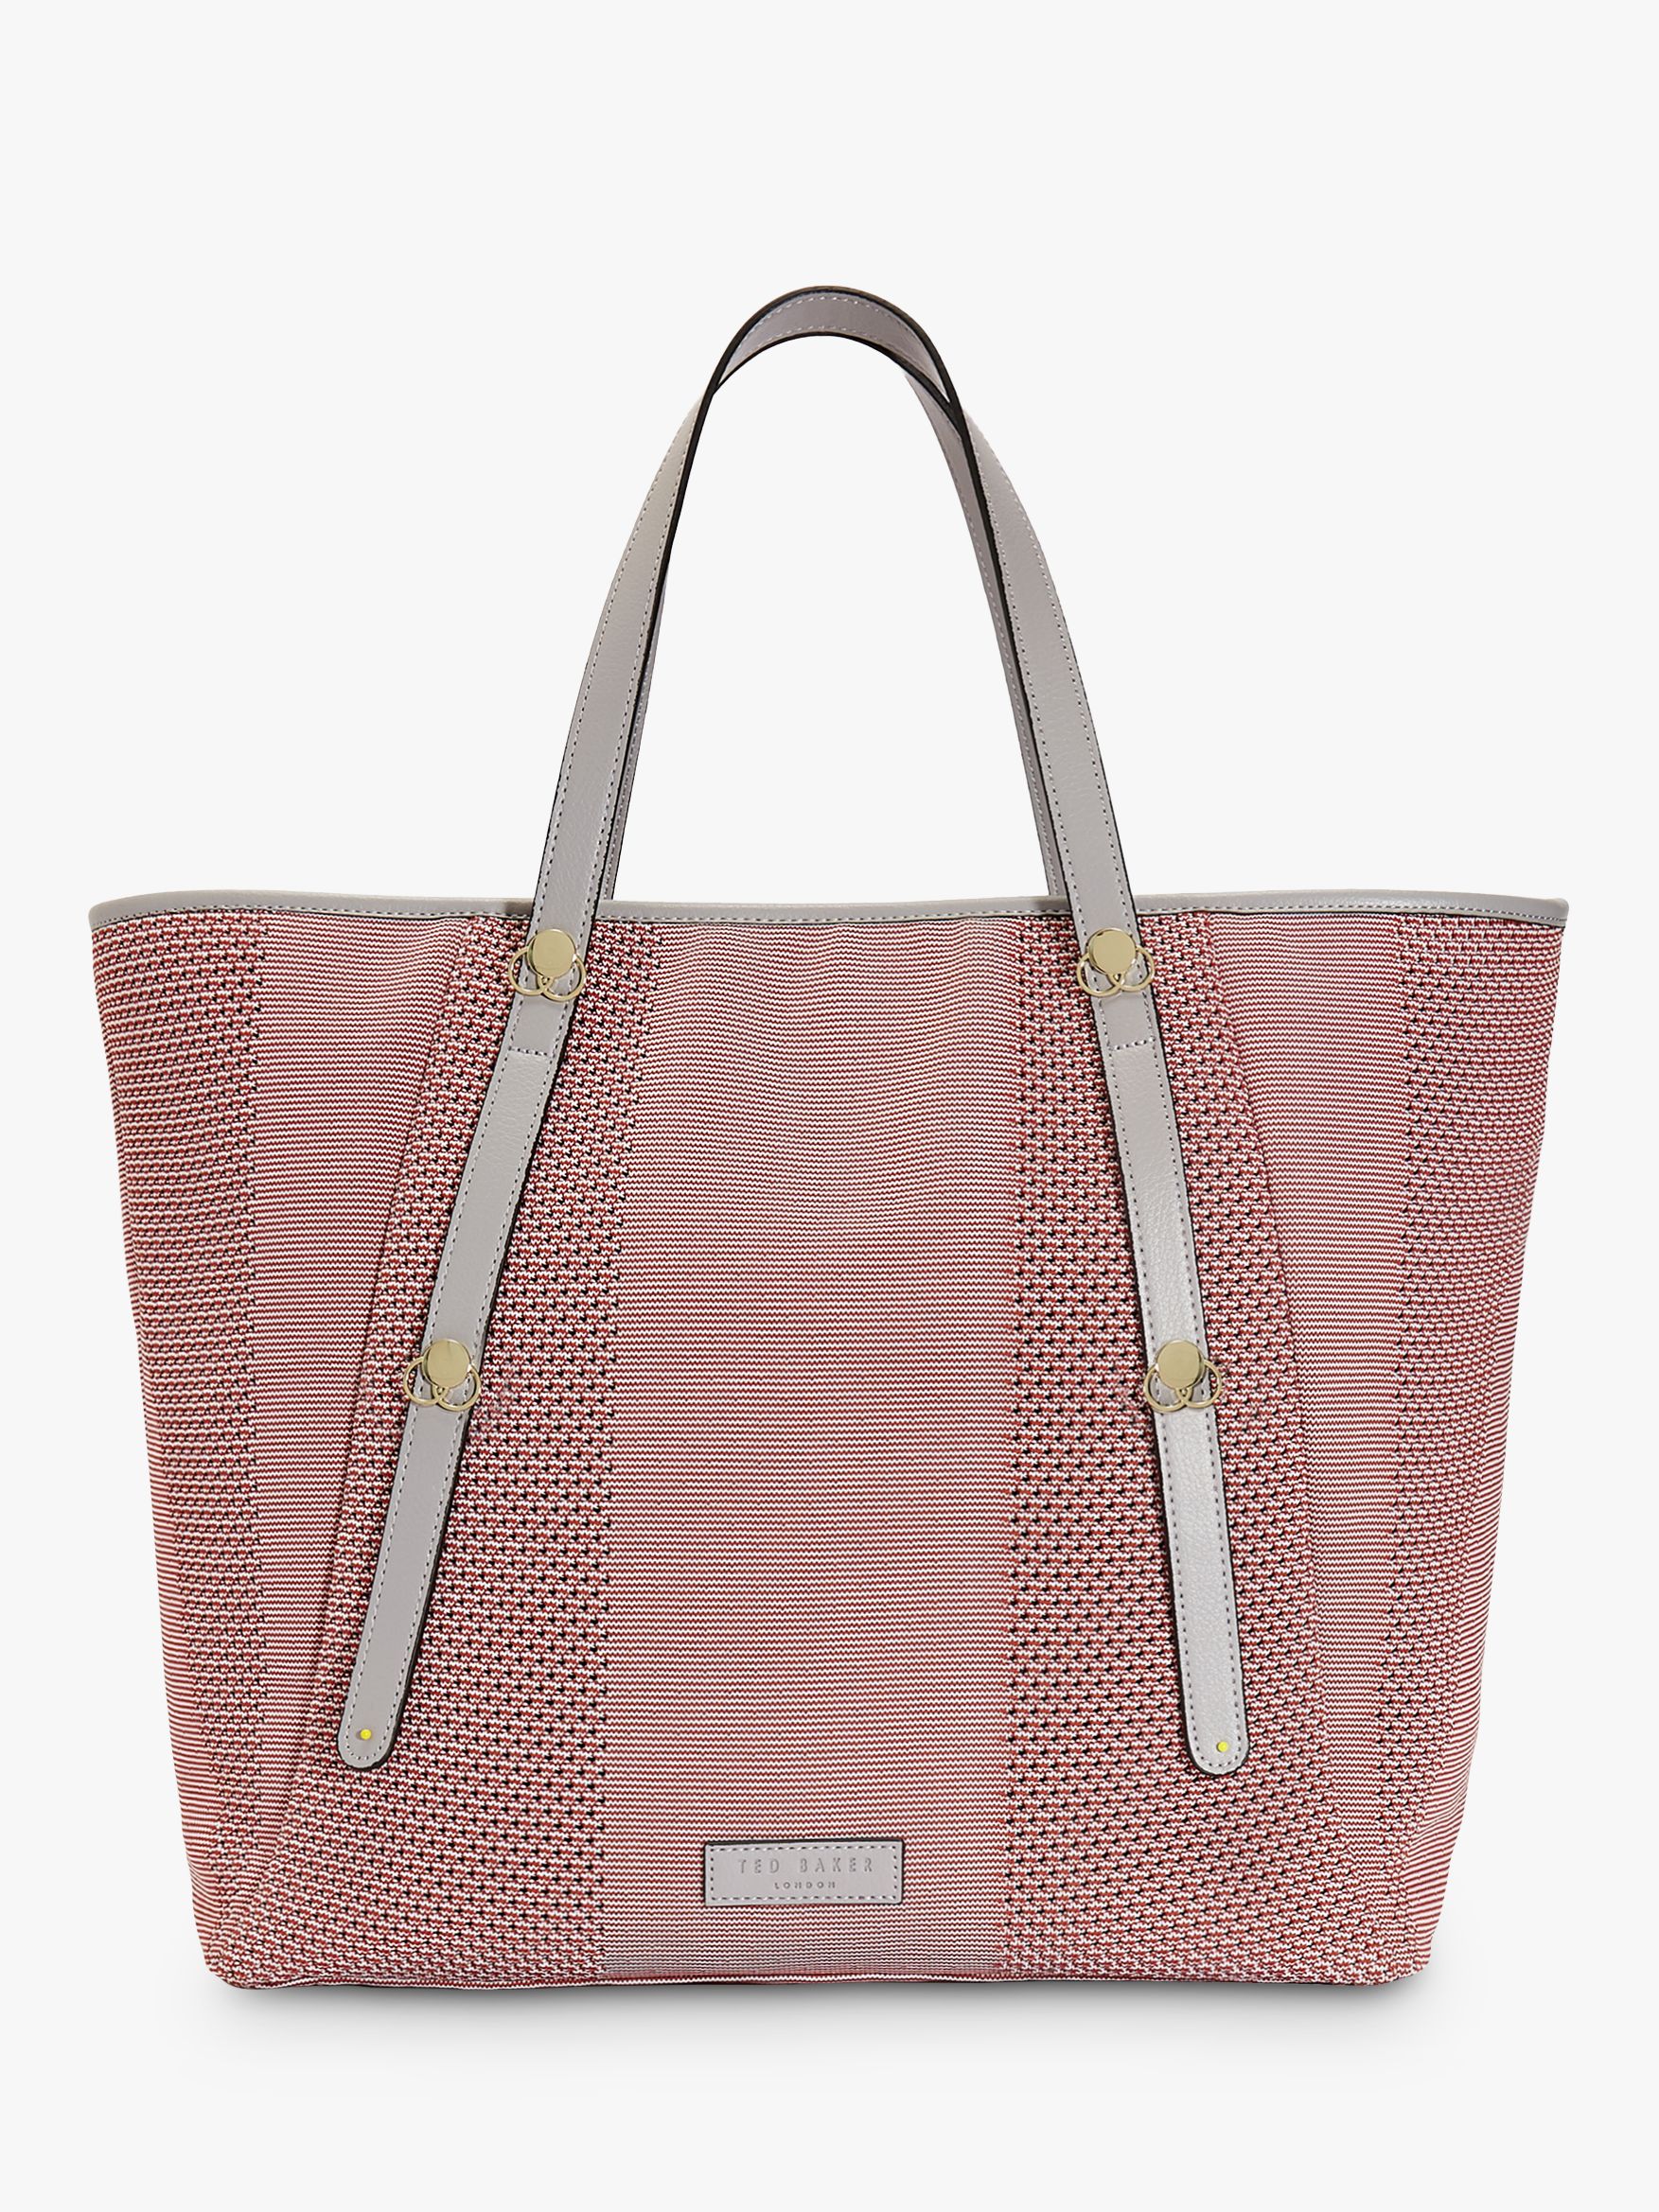 Ted Baker Octomon Woven Tote Bag, Mid Pink at John Lewis & Partners